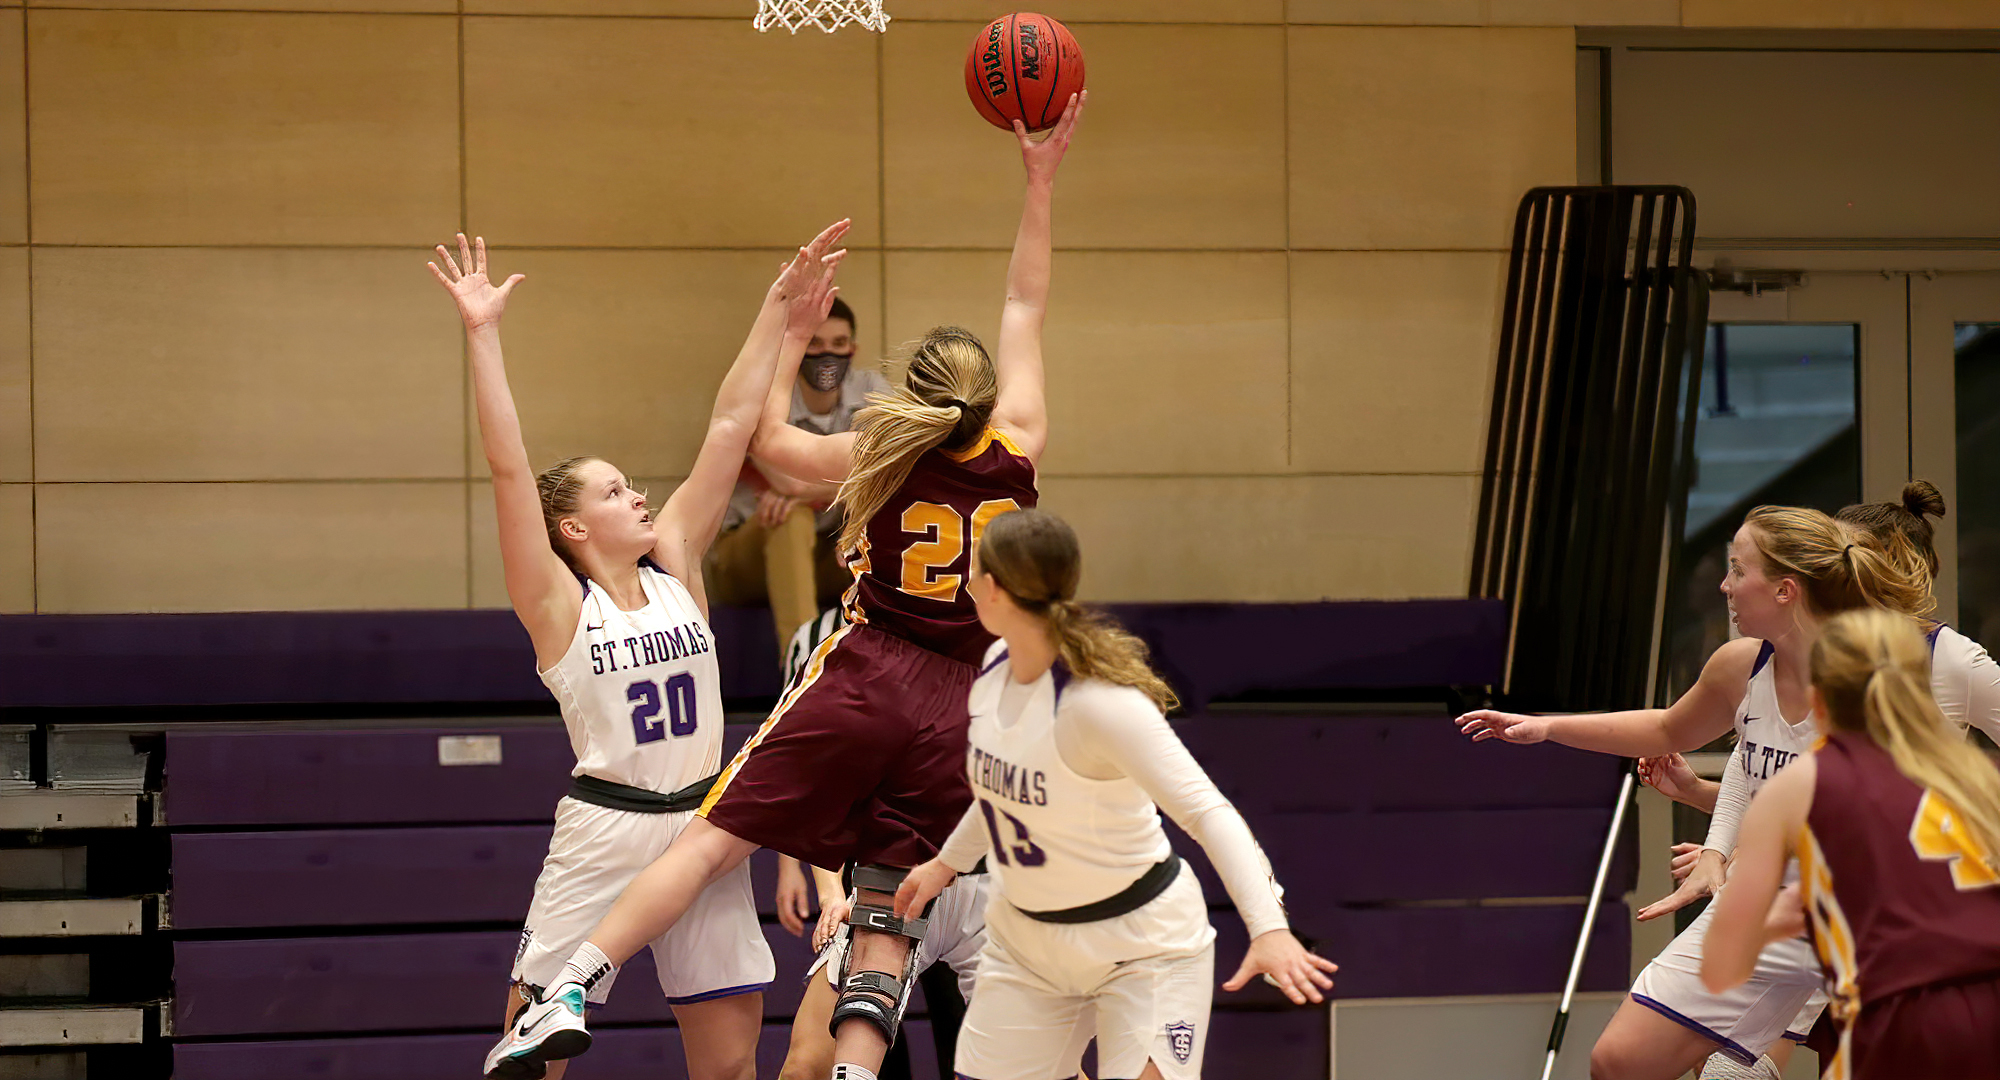 Emily Beseman drives to the basket to drop in two of her game-high 25 points during the Cobbers' game at St. Thomas. (Photo courtesy of D3photography.com)